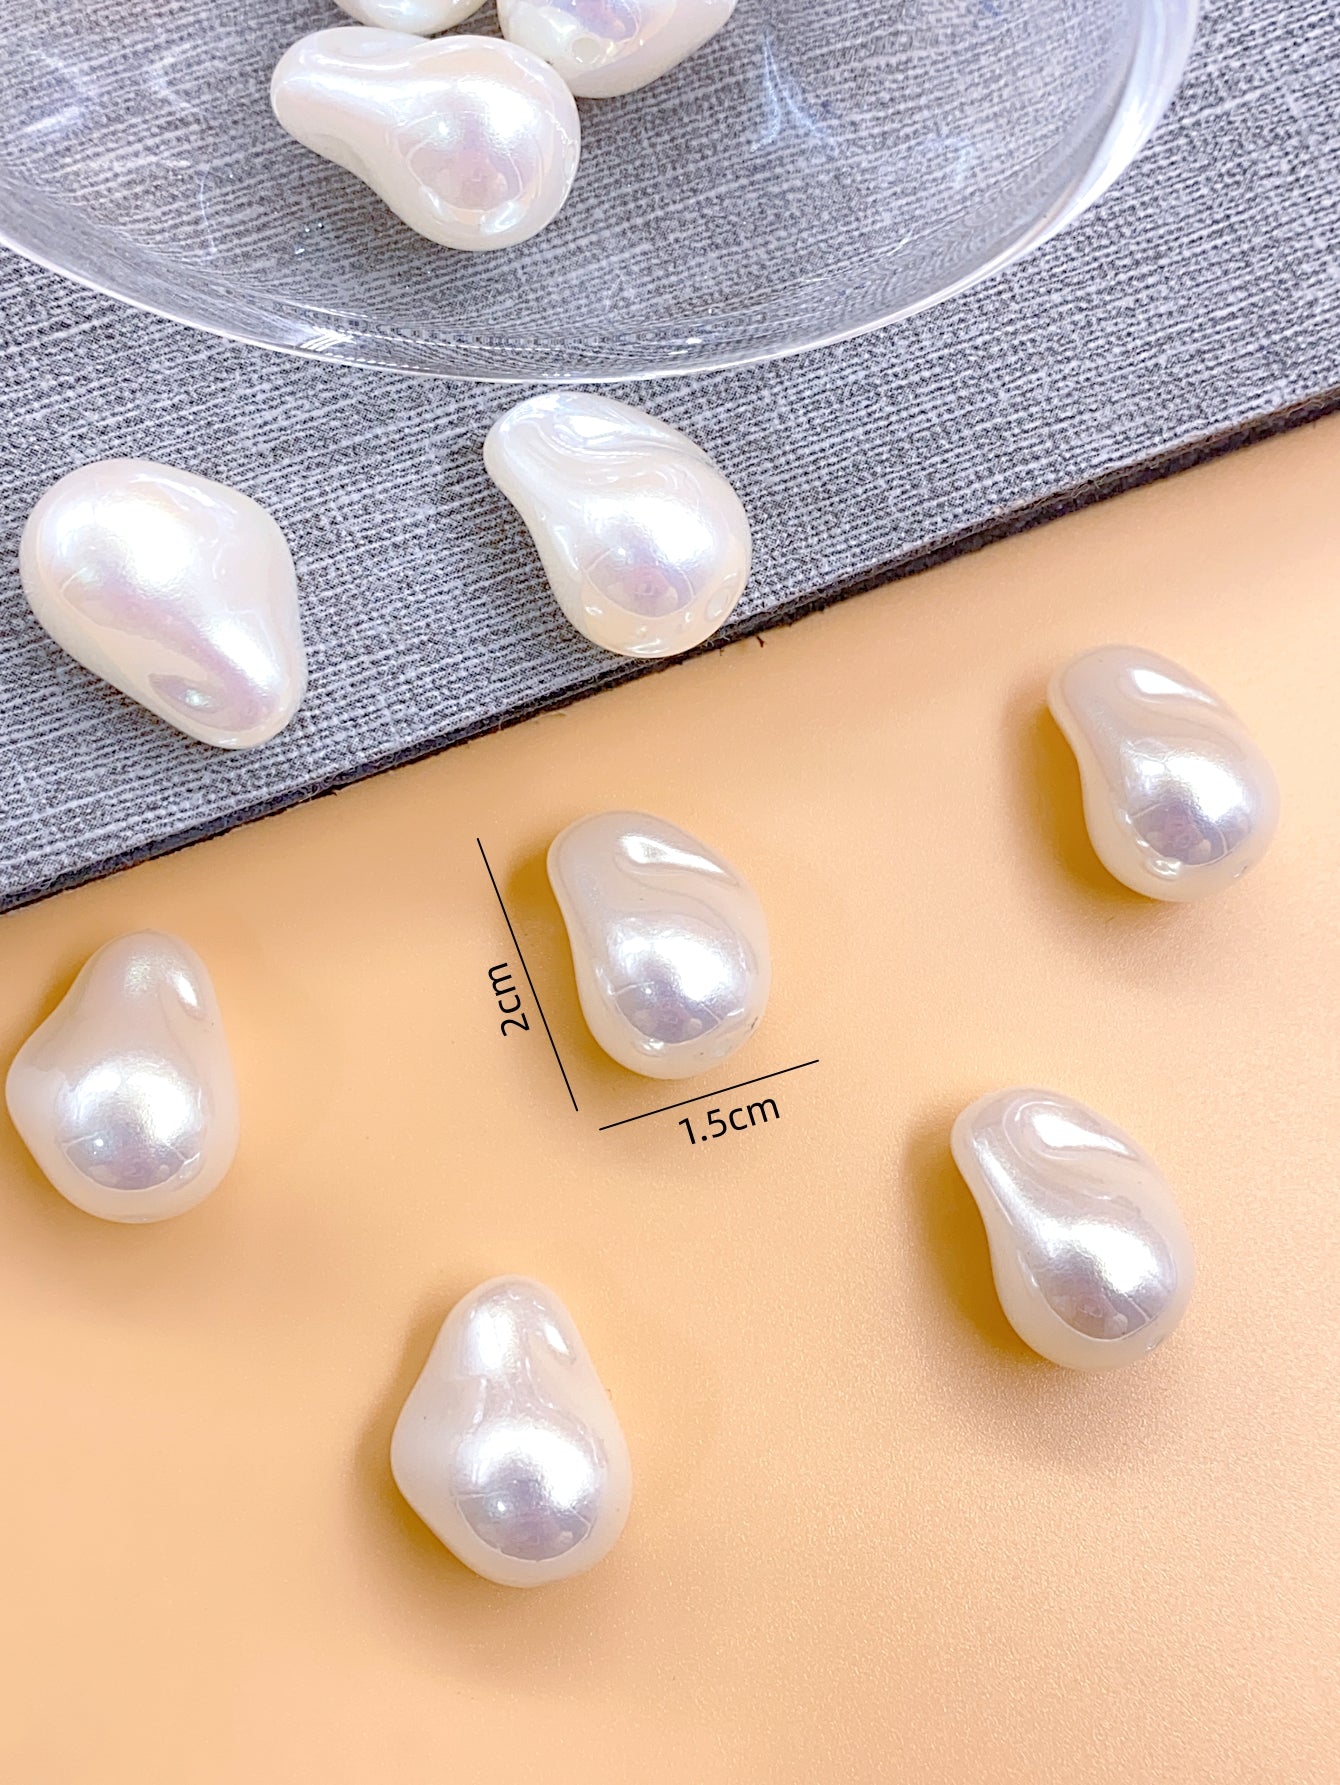 ABS imitation pearl high profile straight hole hand-beaded diy clothing accessories accessories accessories material beads